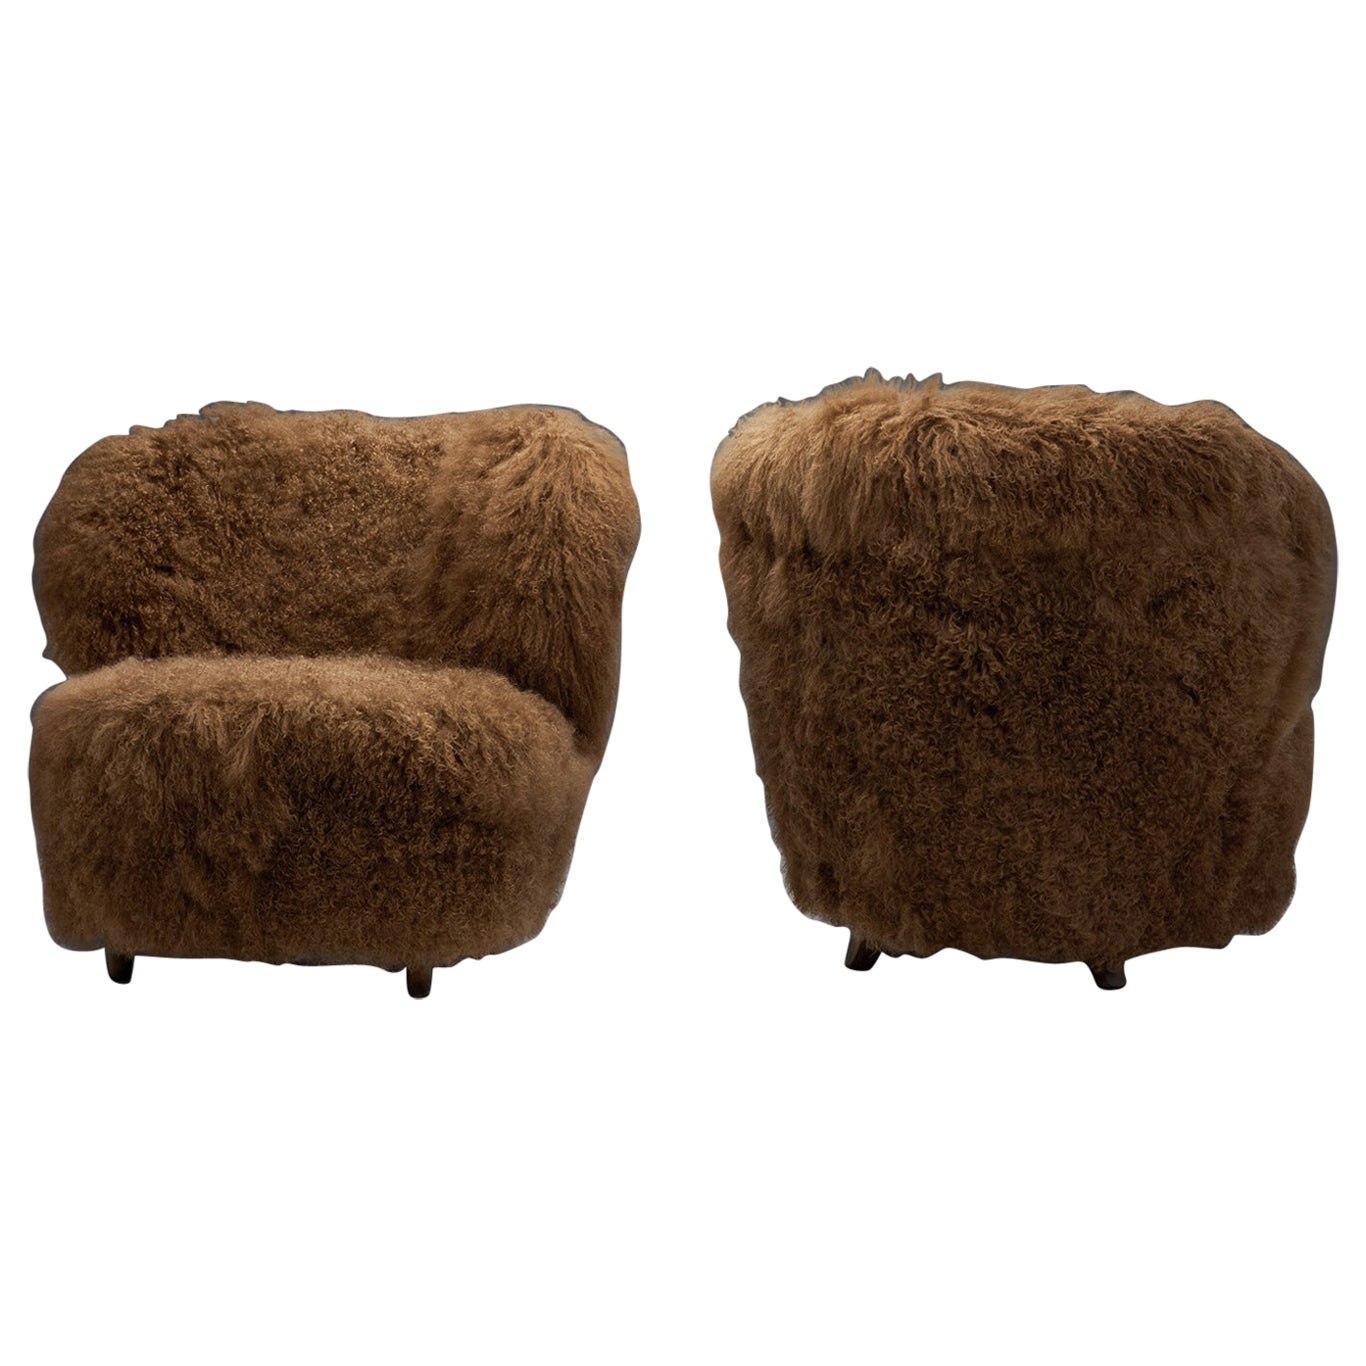 Nordic Modern Lounge Chairs in Longhair Sheepskin, Finland ca 1950s For Sale